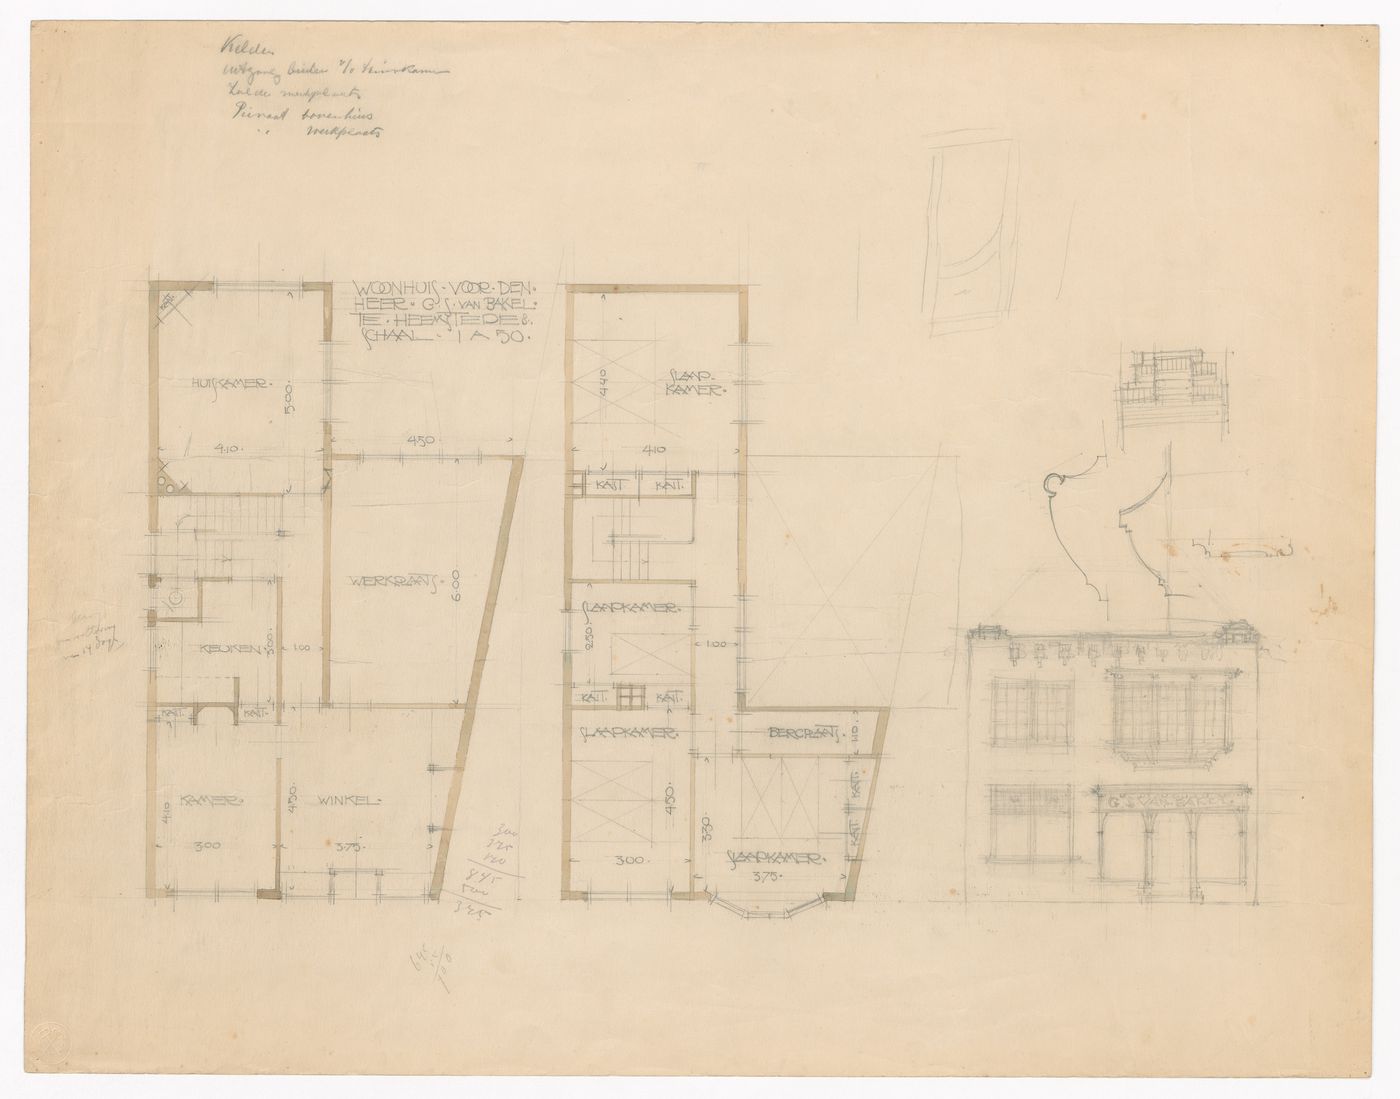 Ground and first floor plans and principal elevation for a house and shop with an L-shaped plan for Mr. G.S. van Bakel, Heemstede, Netherlands